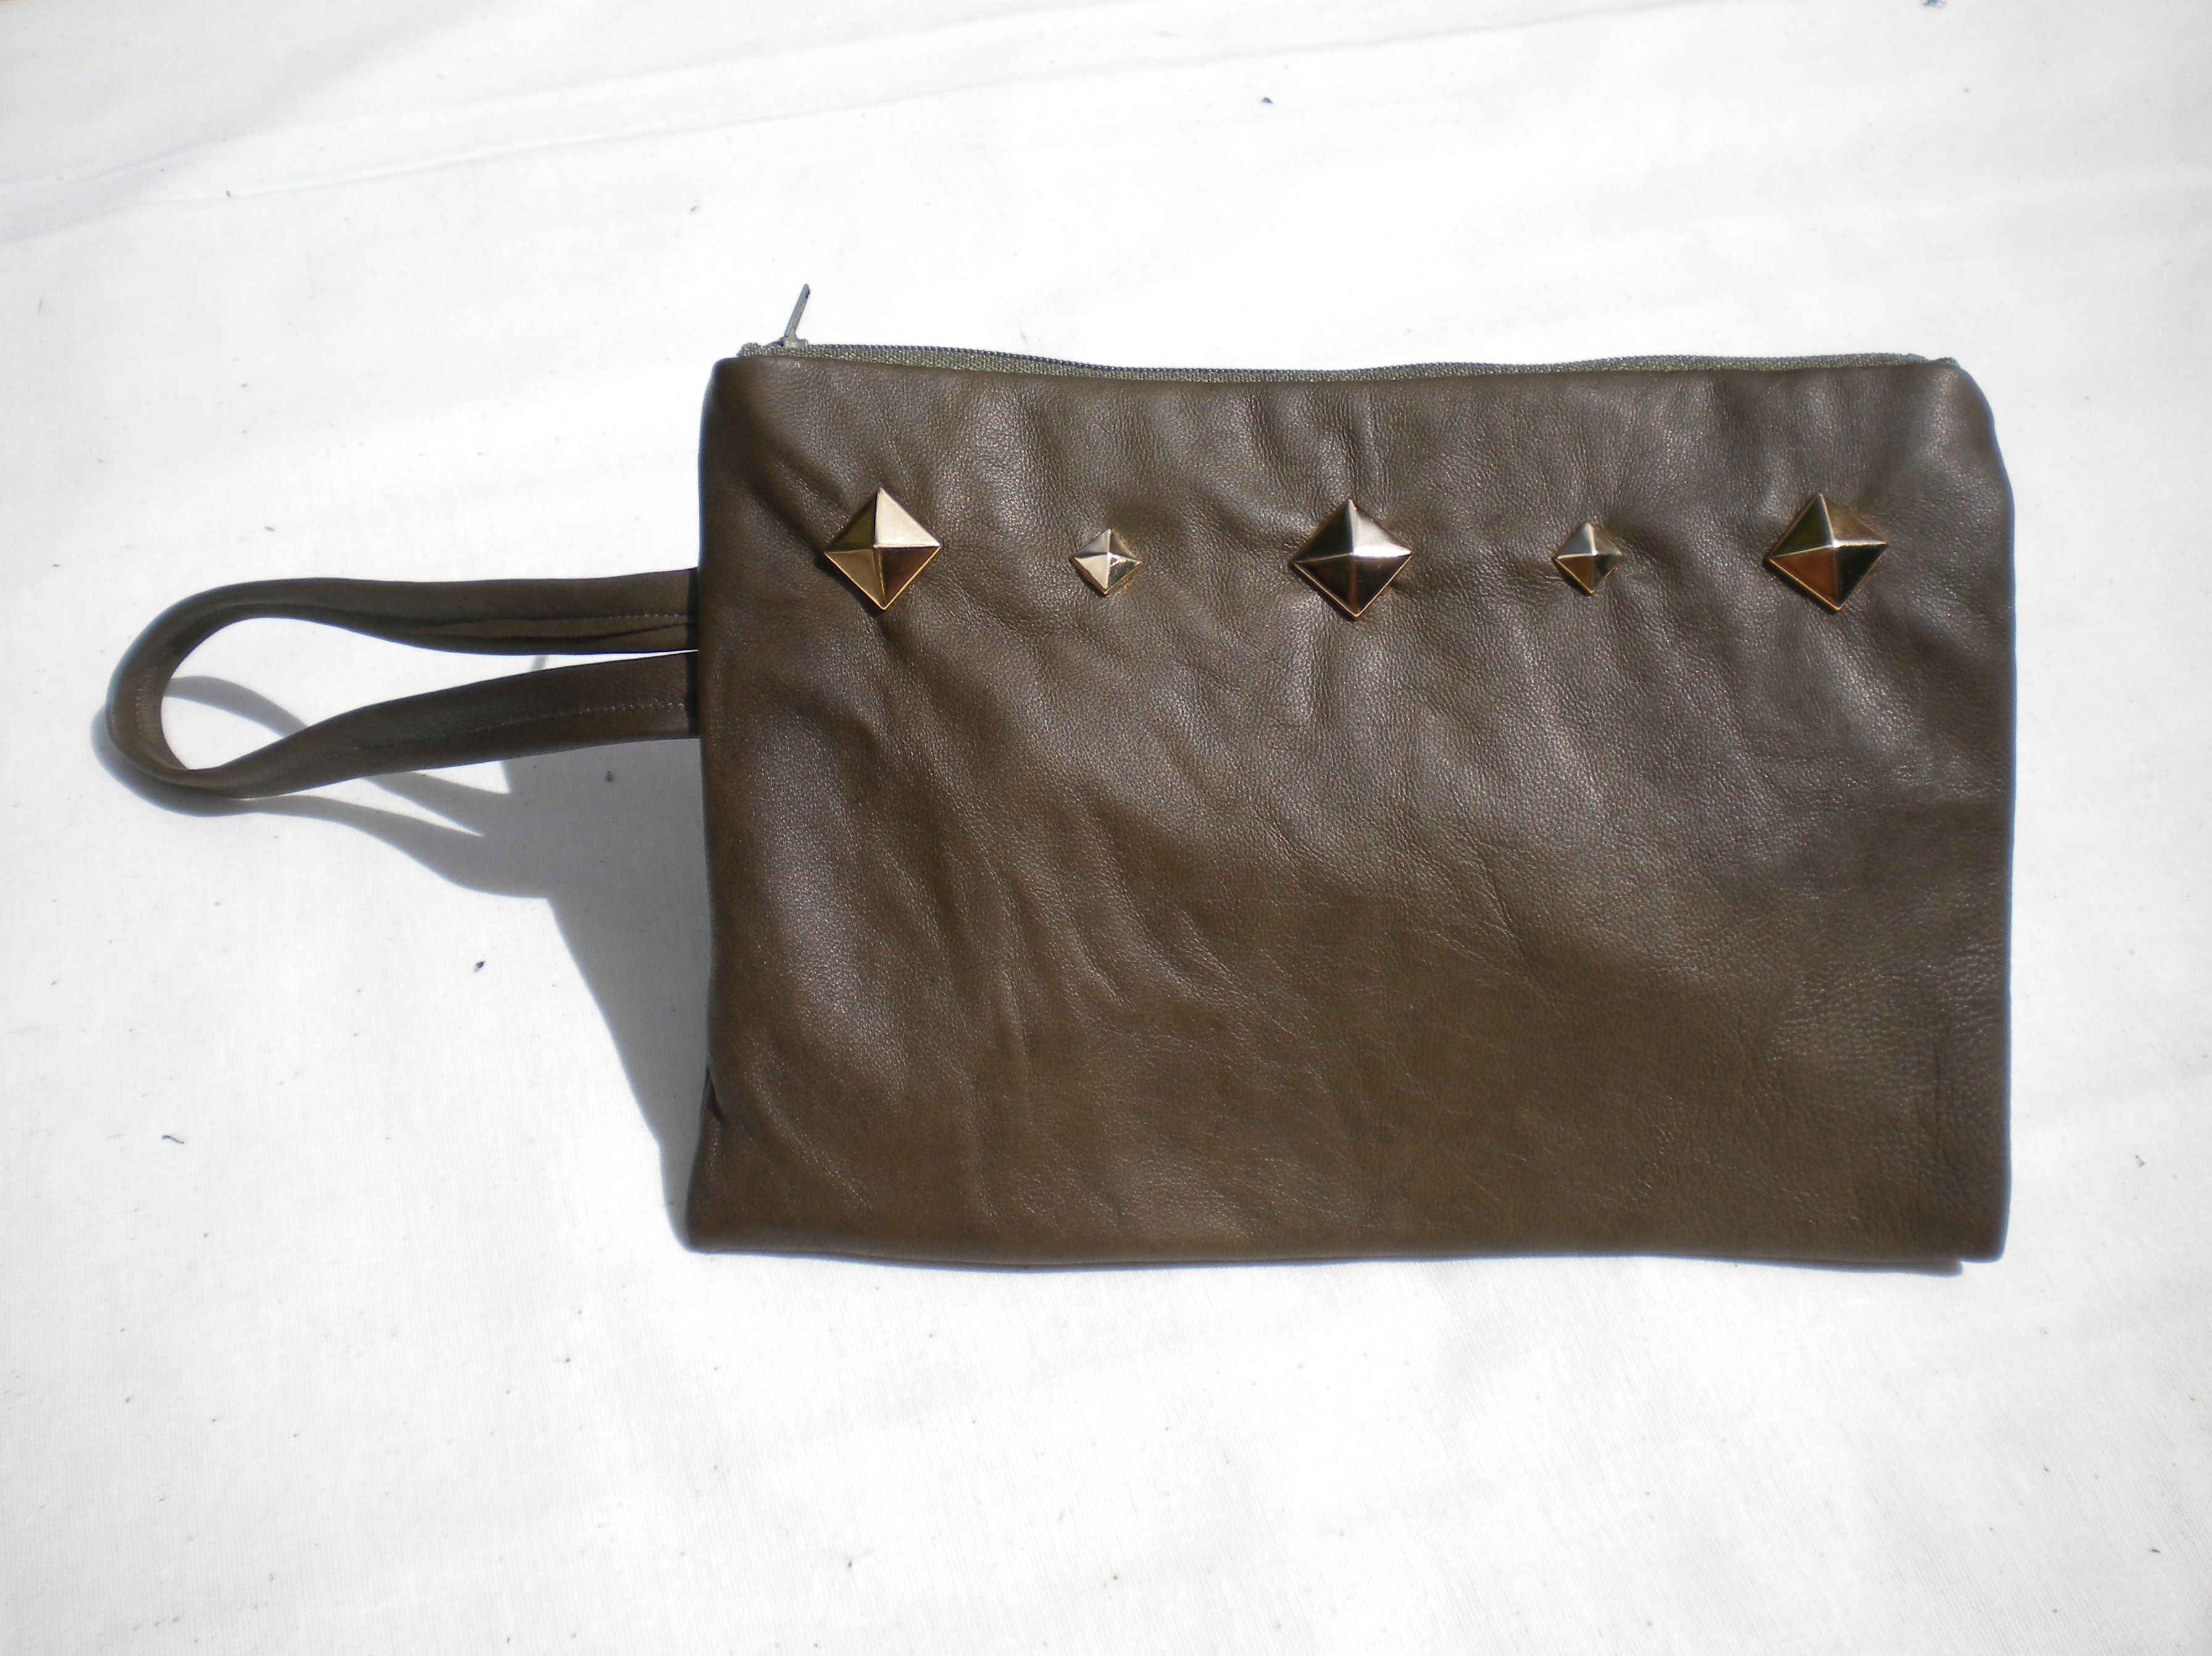  Bottle green leather clutch with studs